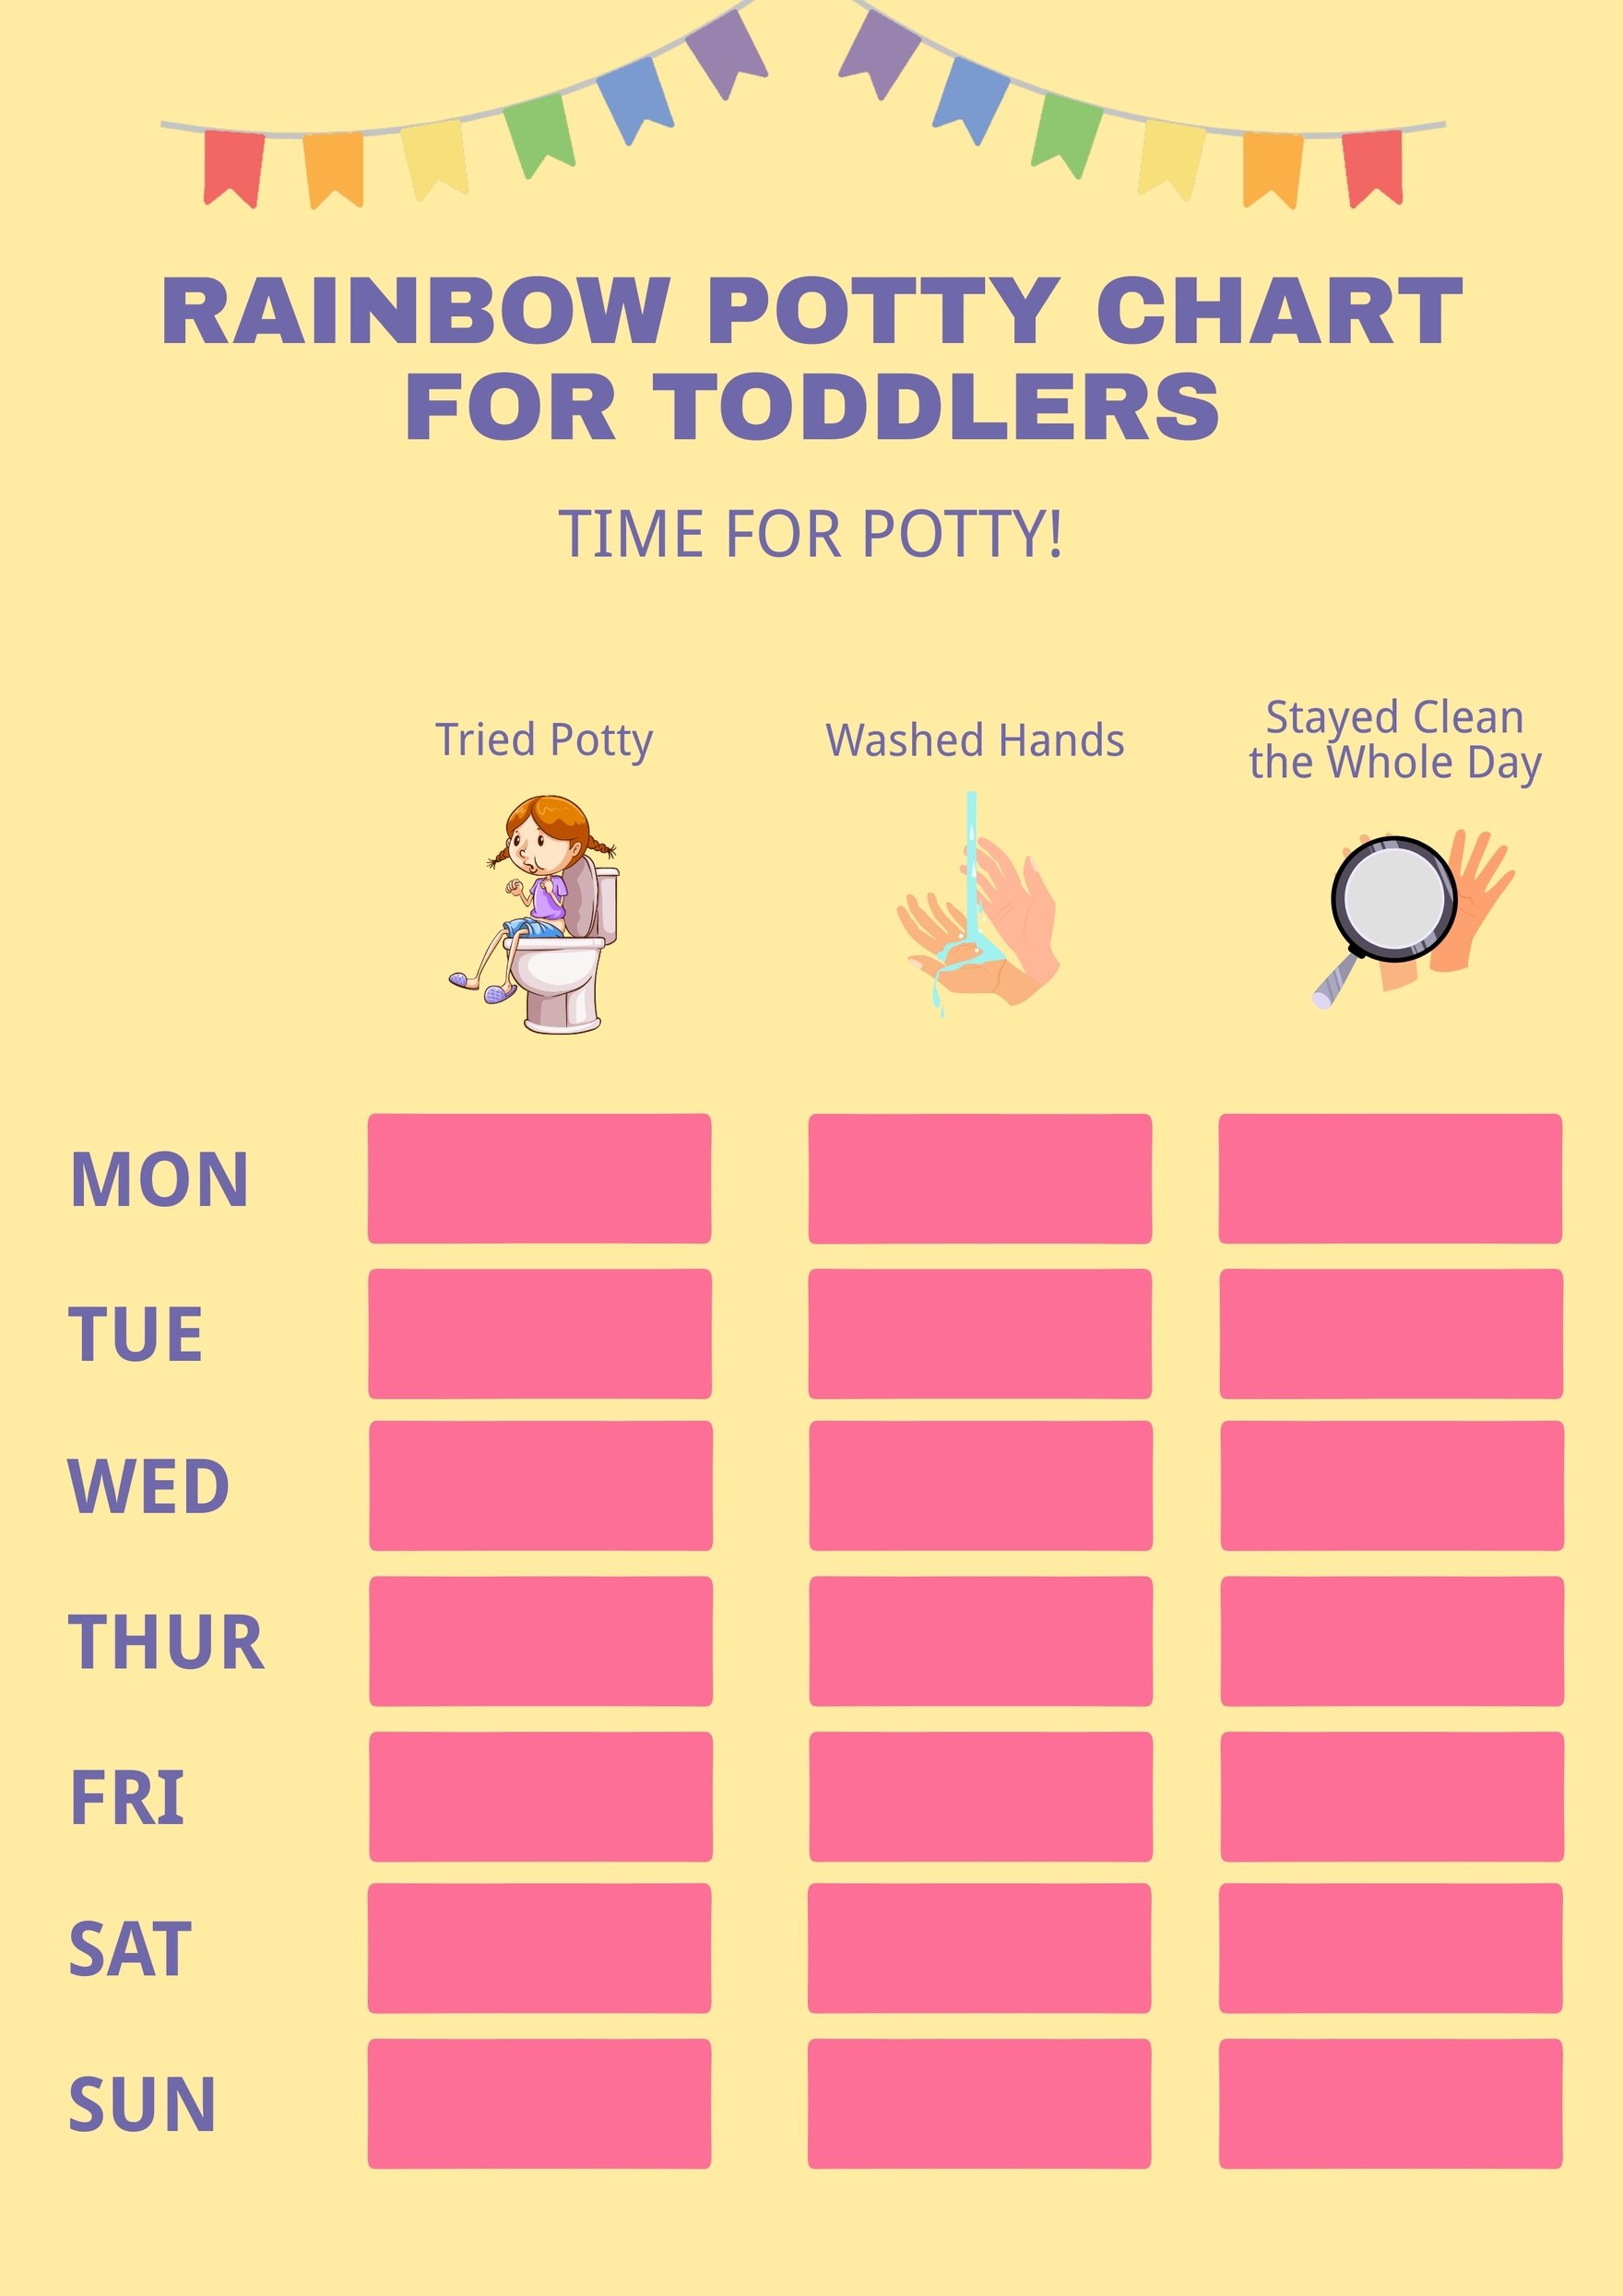 Rainbow Potty Chart For Toddlers